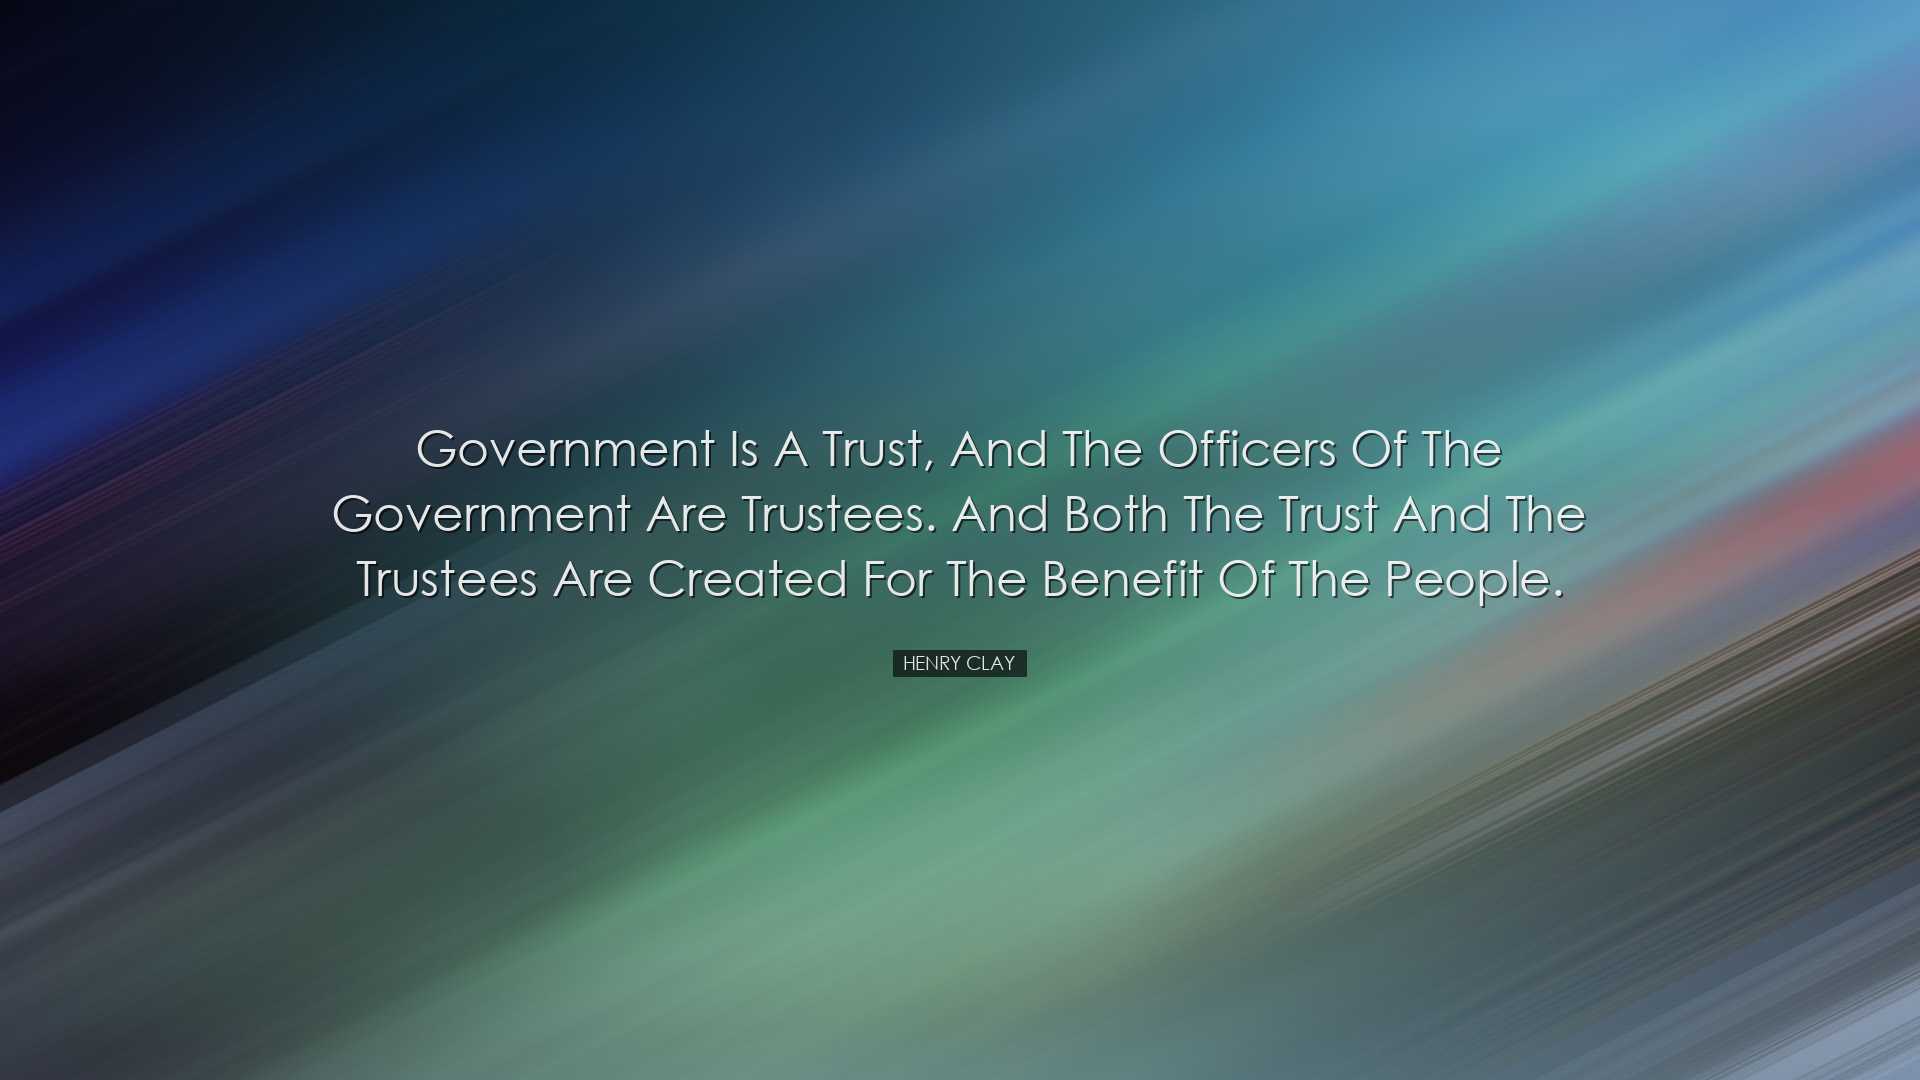 Government is a trust, and the officers of the government are trus